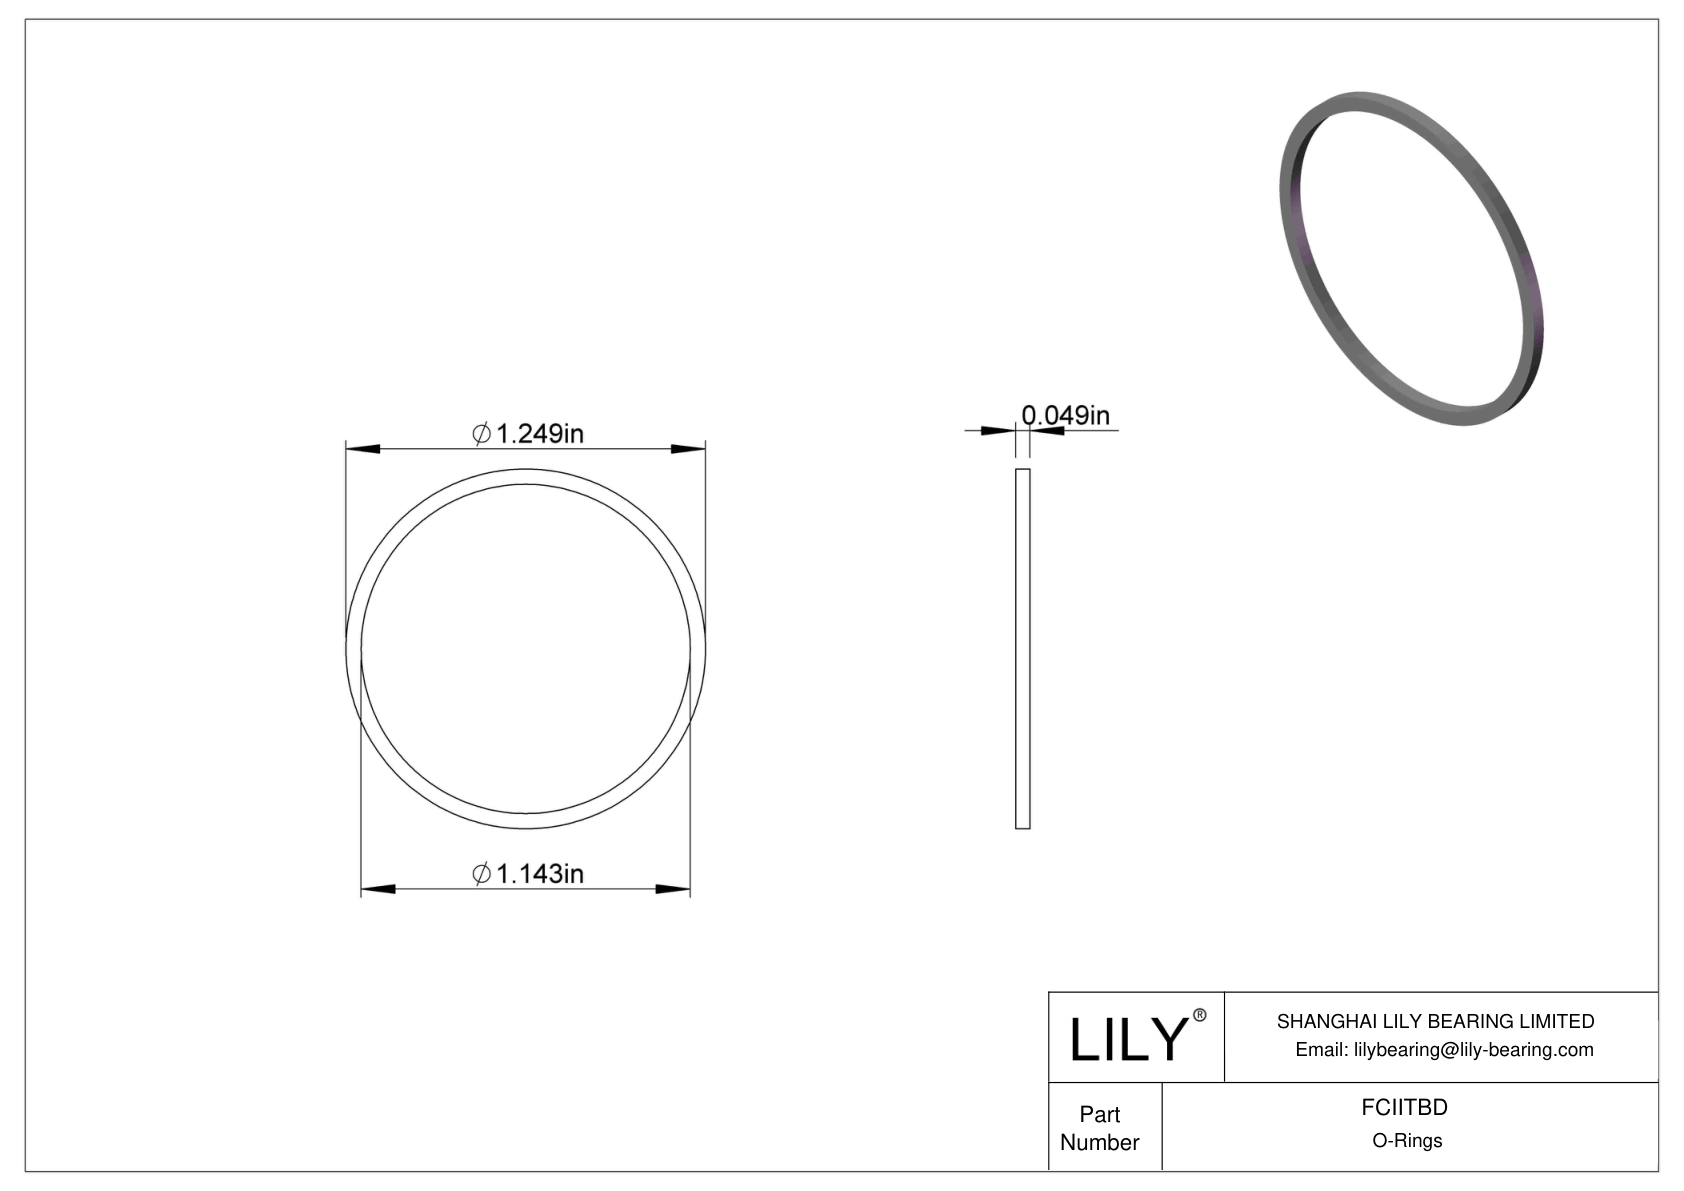 FCIITBD O-Ring Backup Rings cad drawing